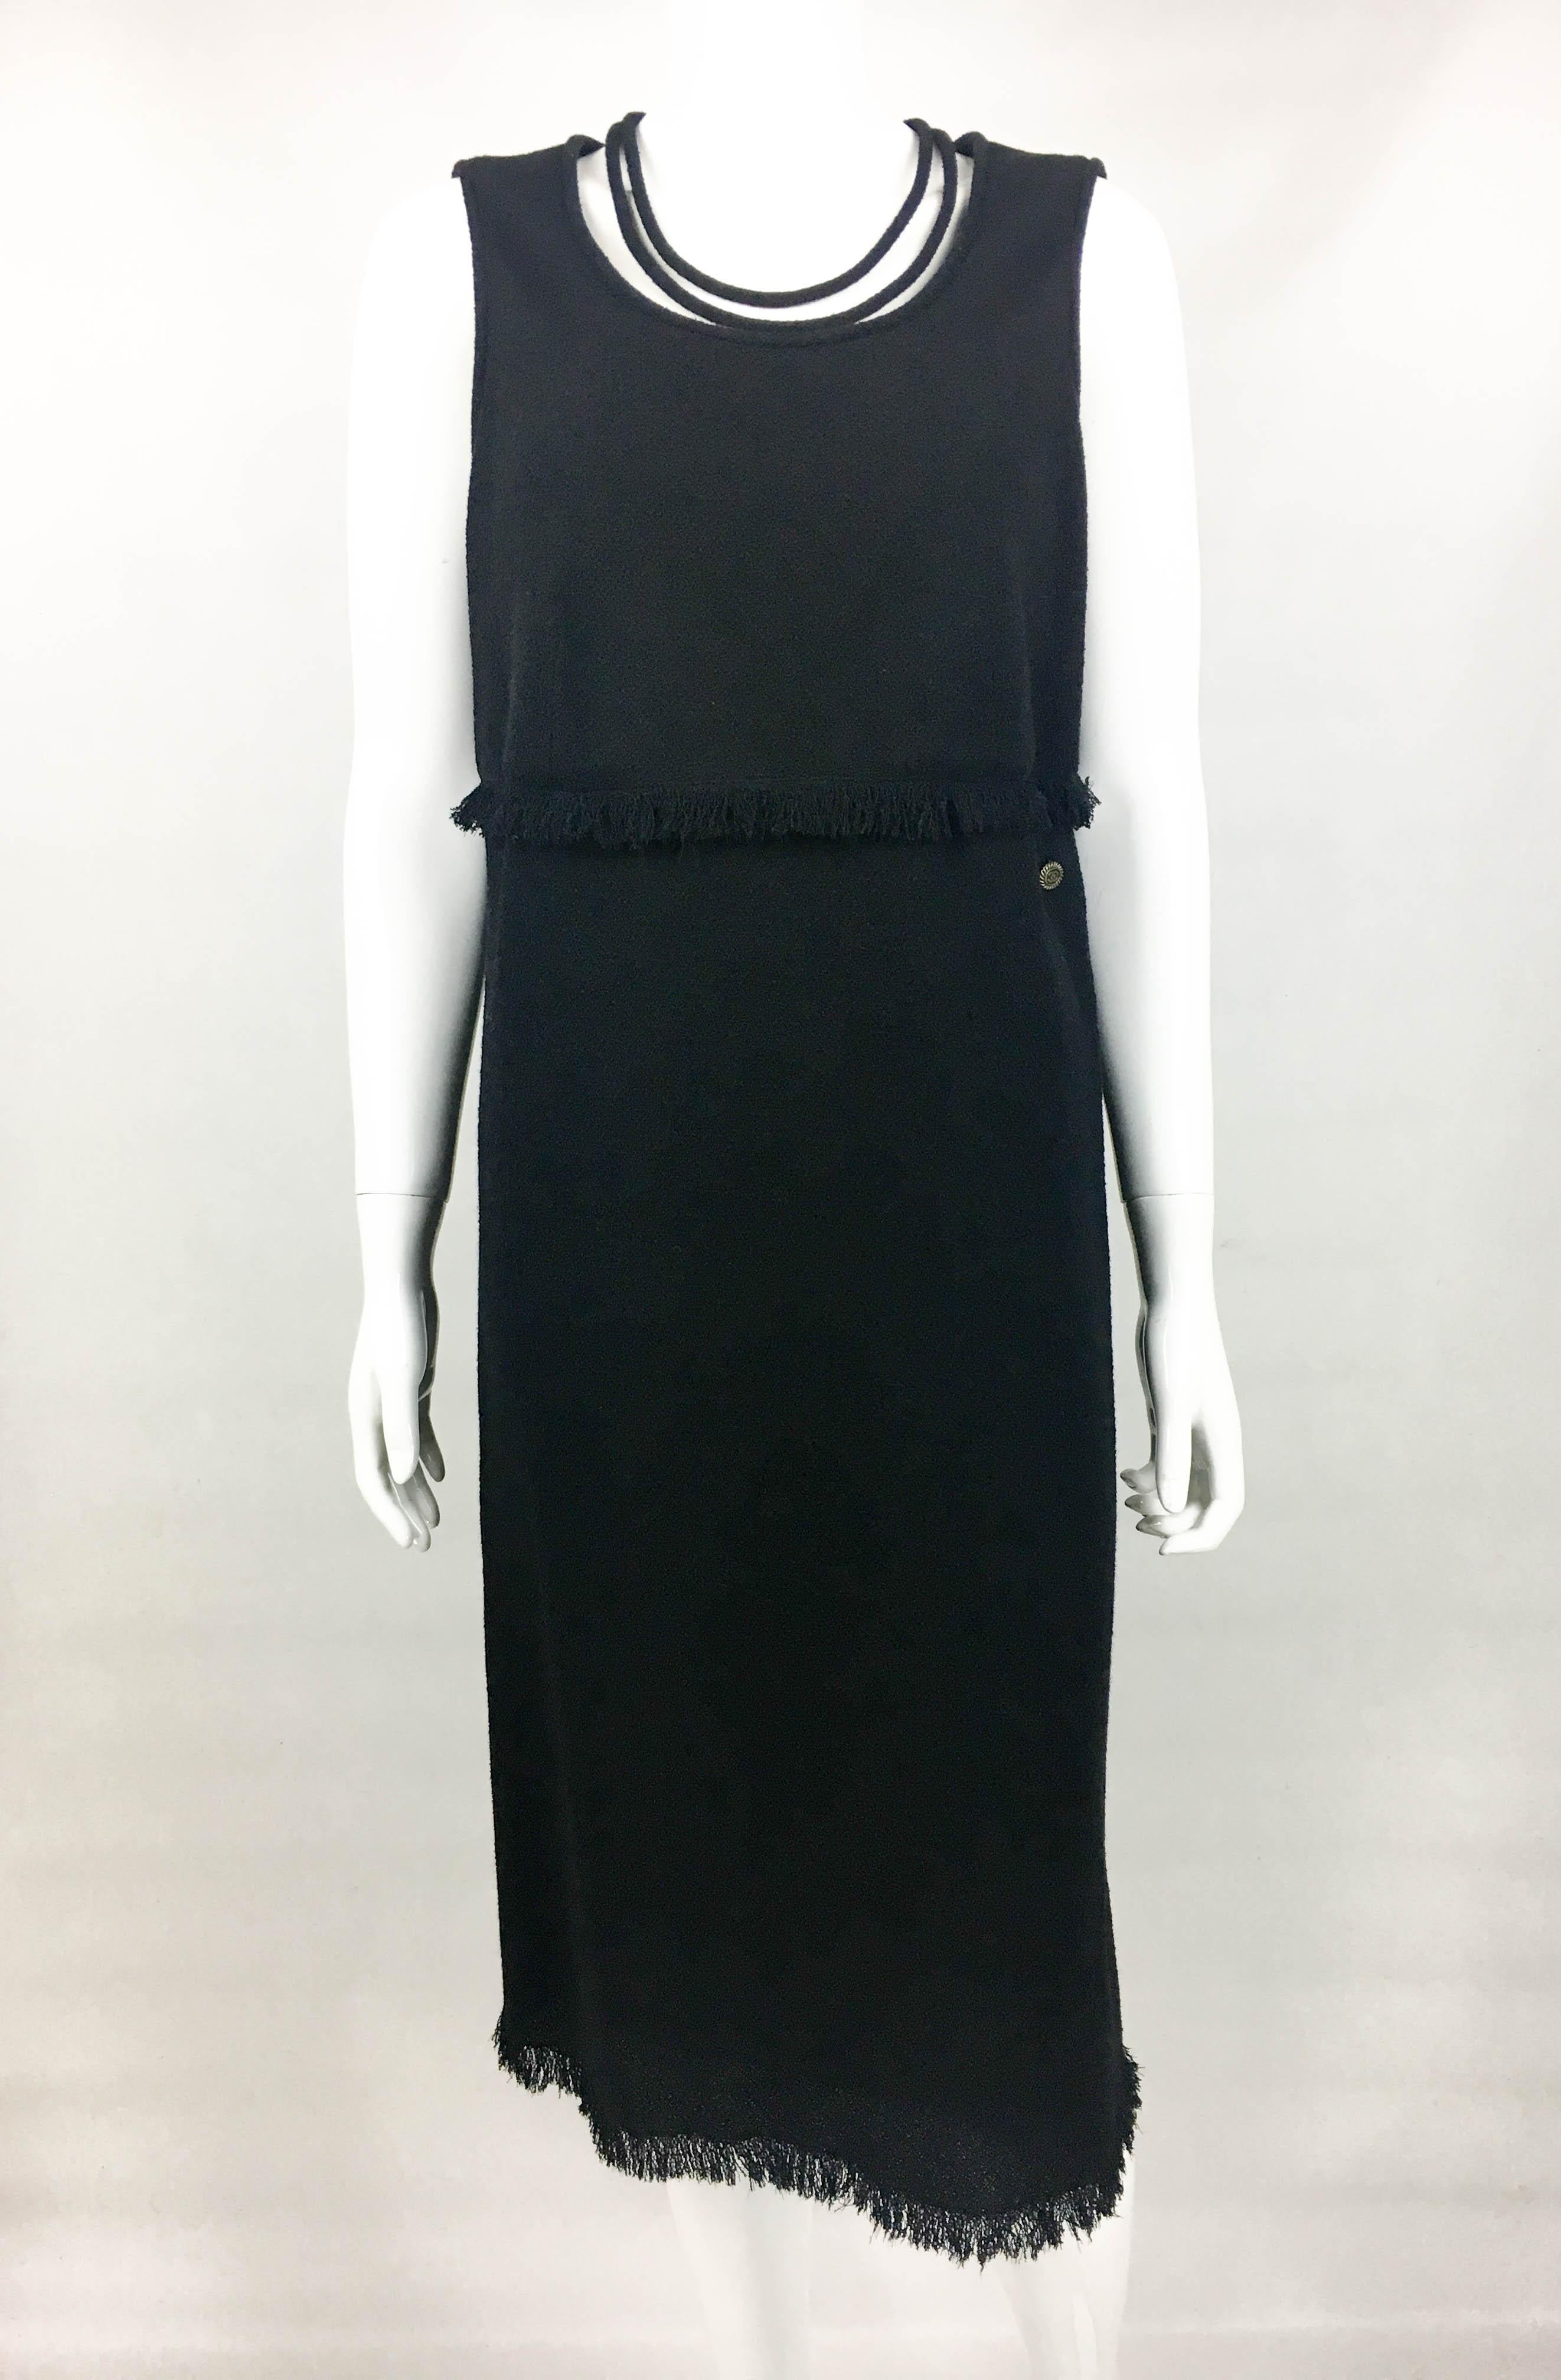 2012 Chanel Black Wool Dress With Fringing Detail In Excellent Condition For Sale In London, Chelsea